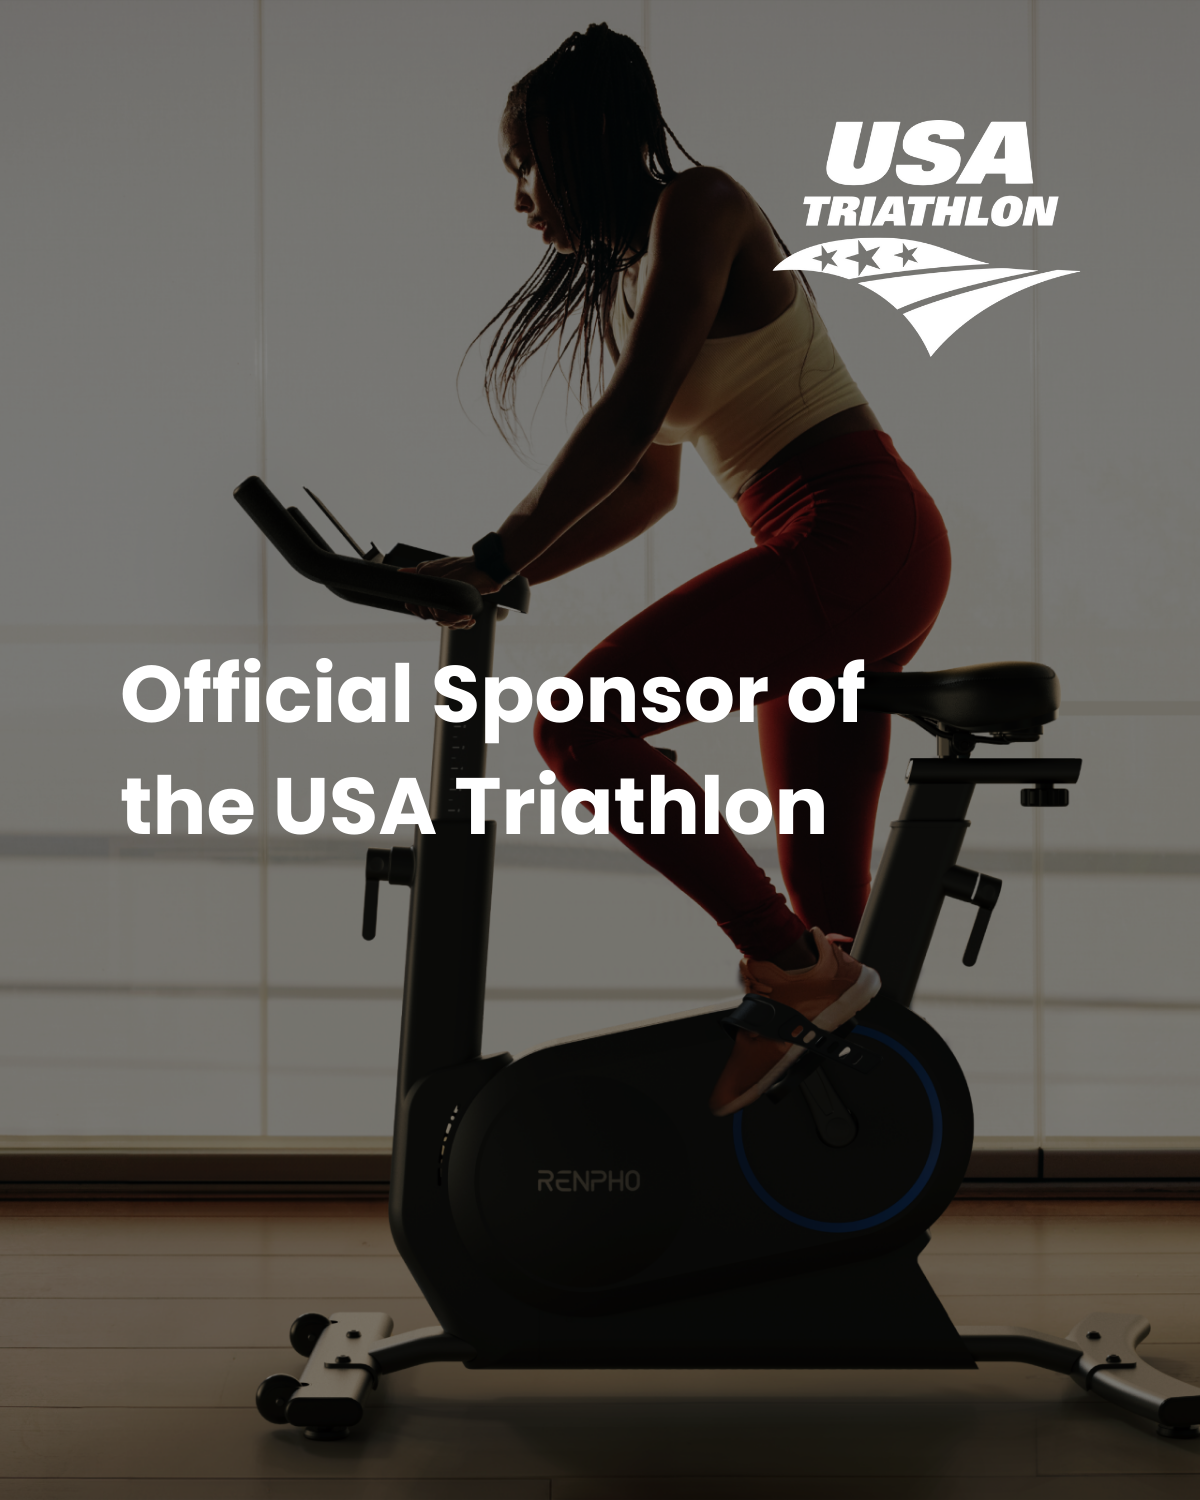 A woman with her hair tied up in a ponytail is exercising on a Renpho EU AI Smart Bike S in a room. The text "official sponsor of the USA Triathlon" is overlaid at the top.